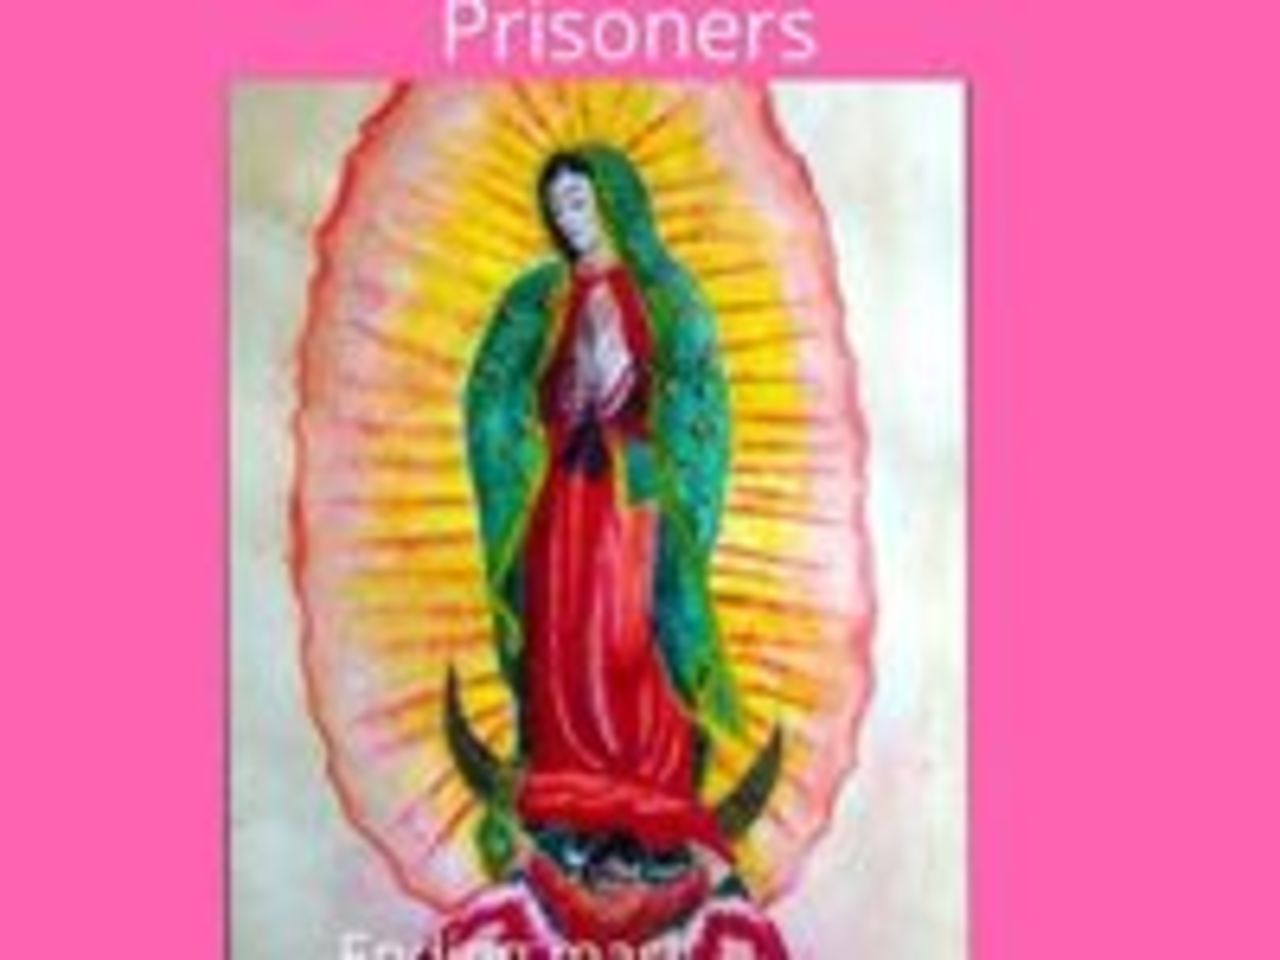 MOTHER DAY CARDS BY PRISONERS  Movement to End Mass Incarceration thru Art Follow & Like Us #prison #socialjustice #art #poetry #writer #cut50 #art4justicefund #jail #hiphop #civilrights #artist #prisonart #mother #motherhood #women #mom #mothersday https://pin.it/dcljhbkpbsnxes